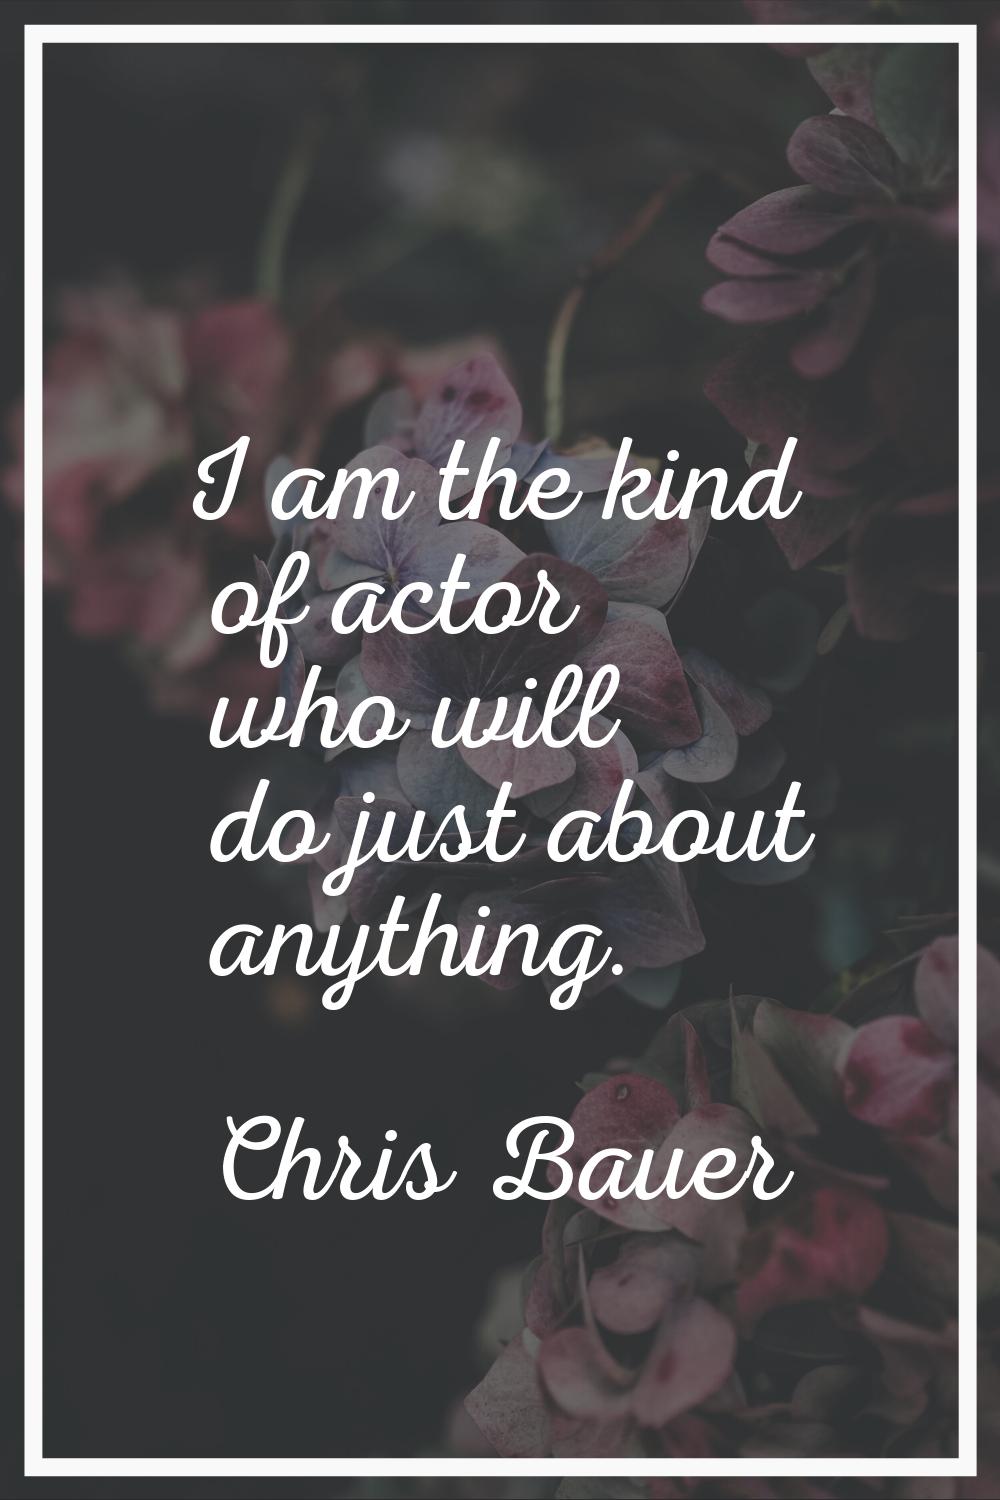 I am the kind of actor who will do just about anything.